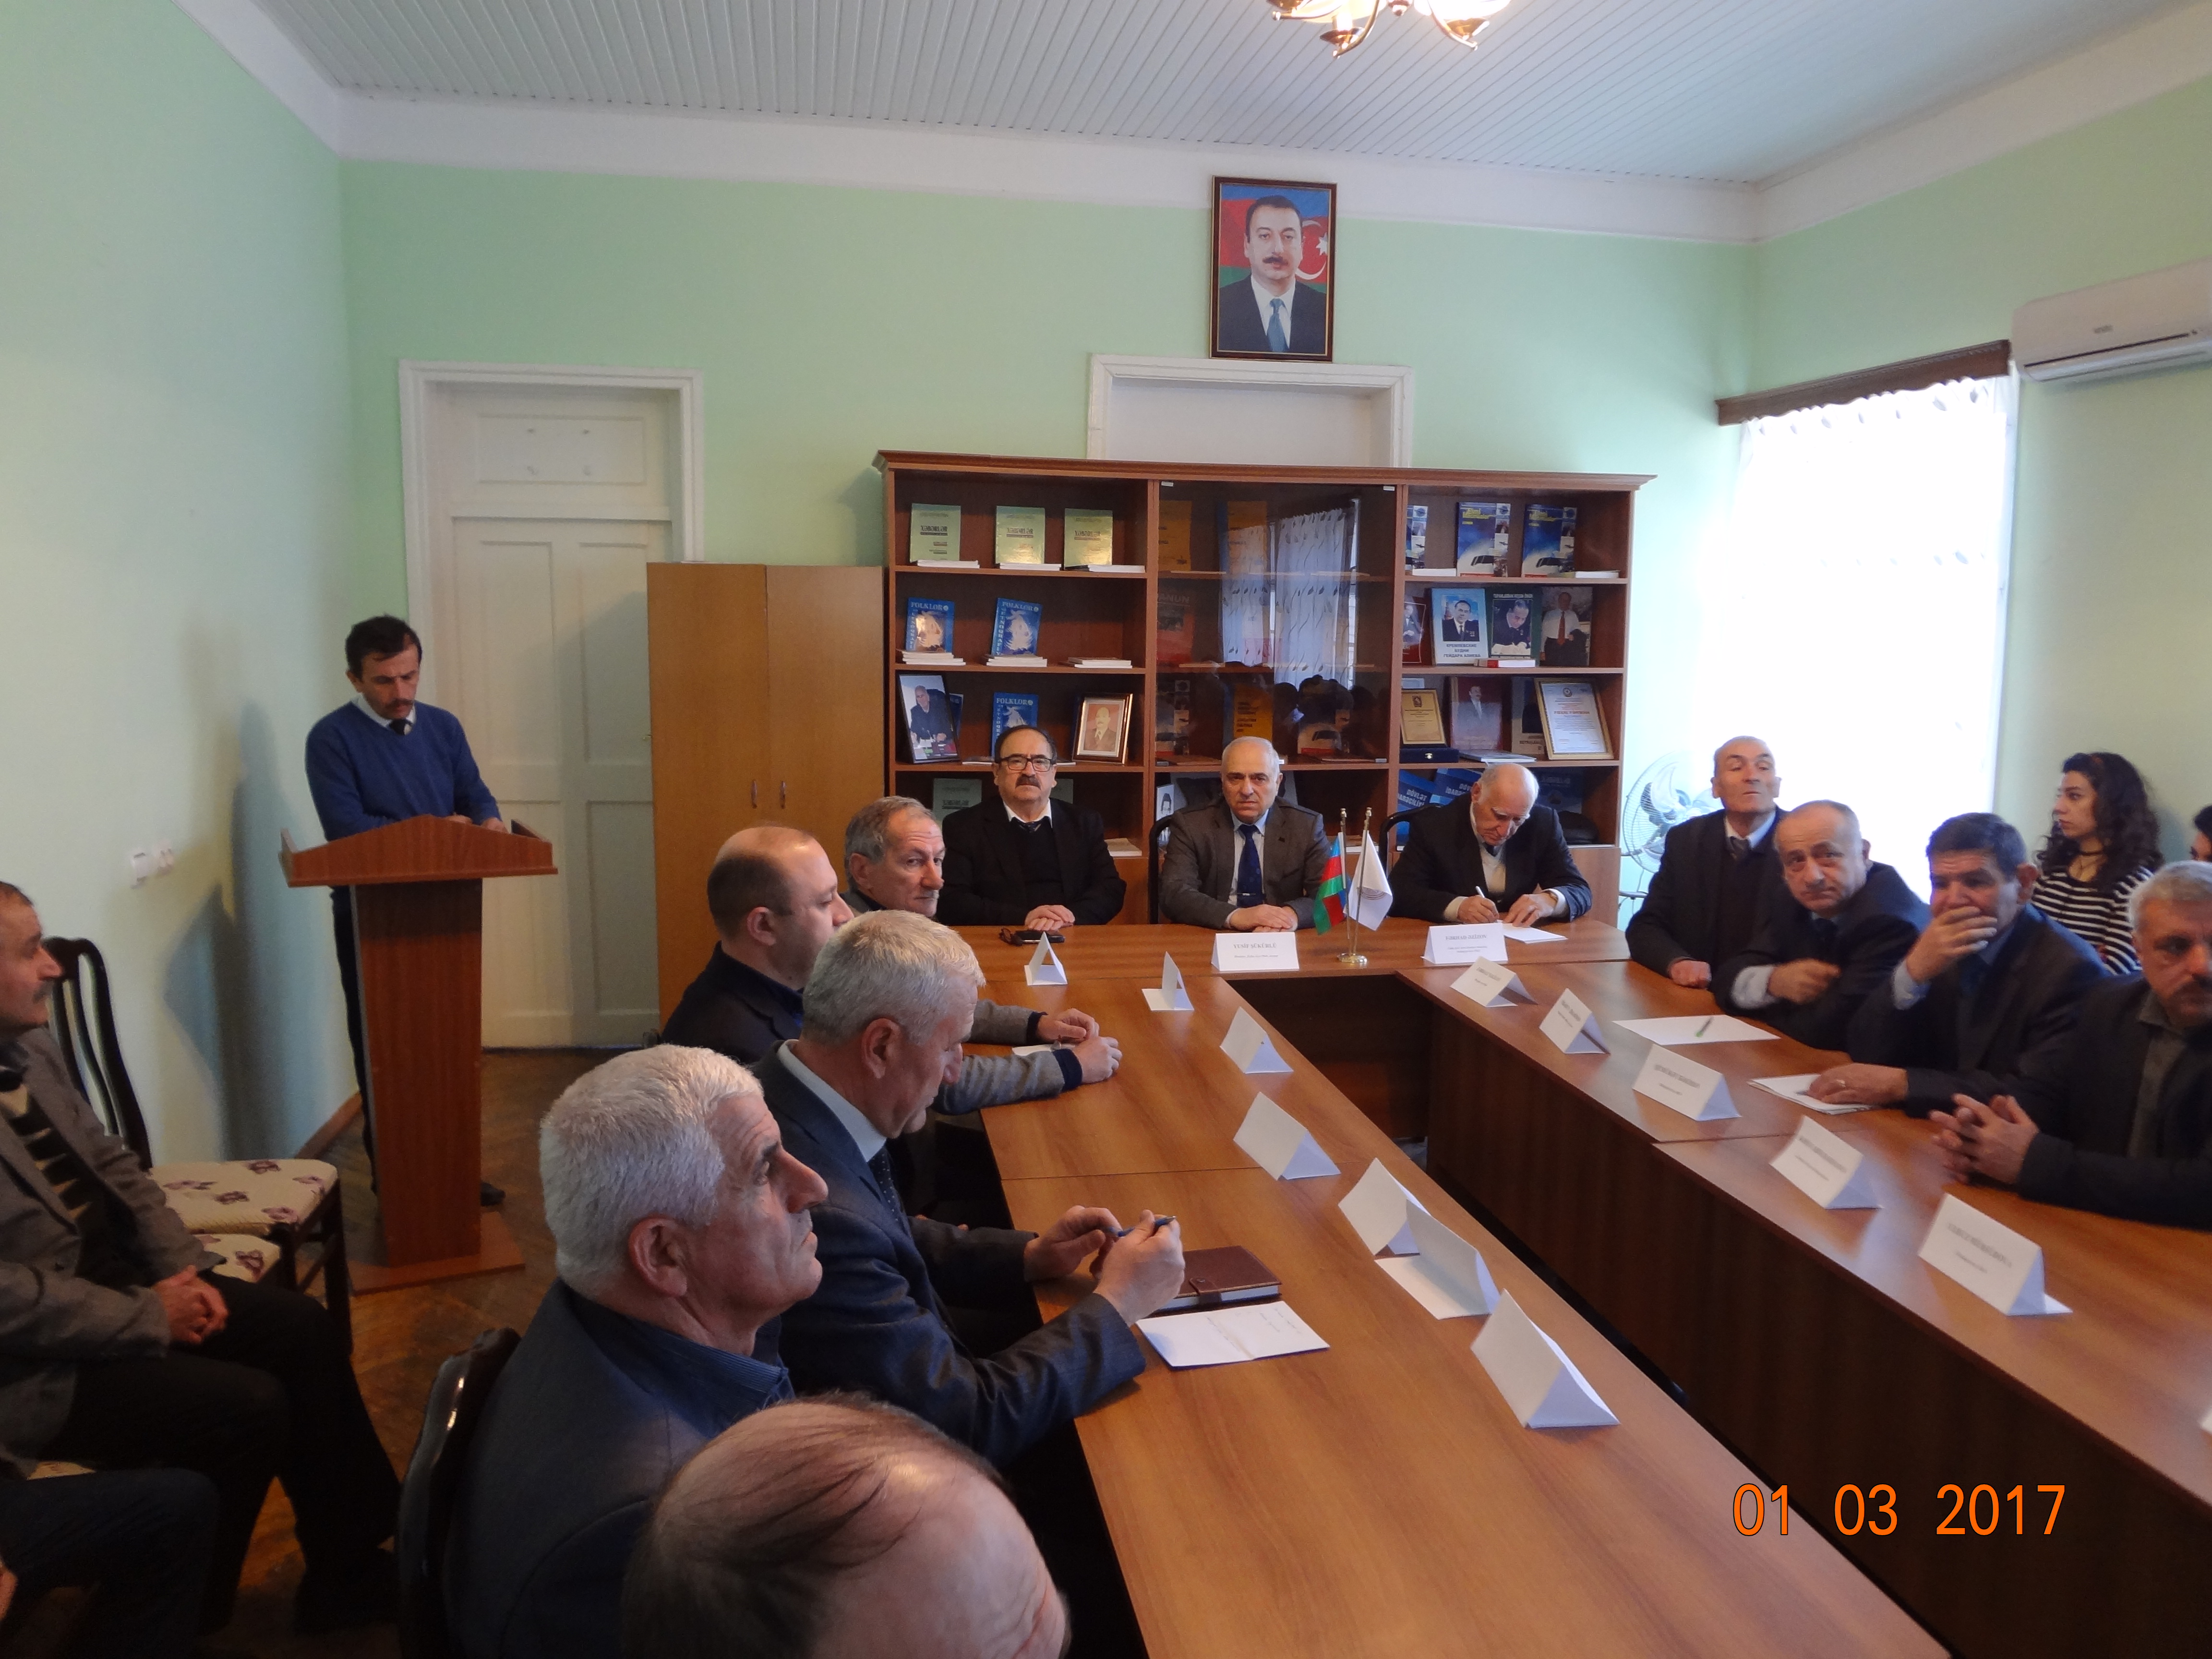 THE NEXT MEETING OF SCIENTIFIC COUNCIL WAS HELD IN SRSC